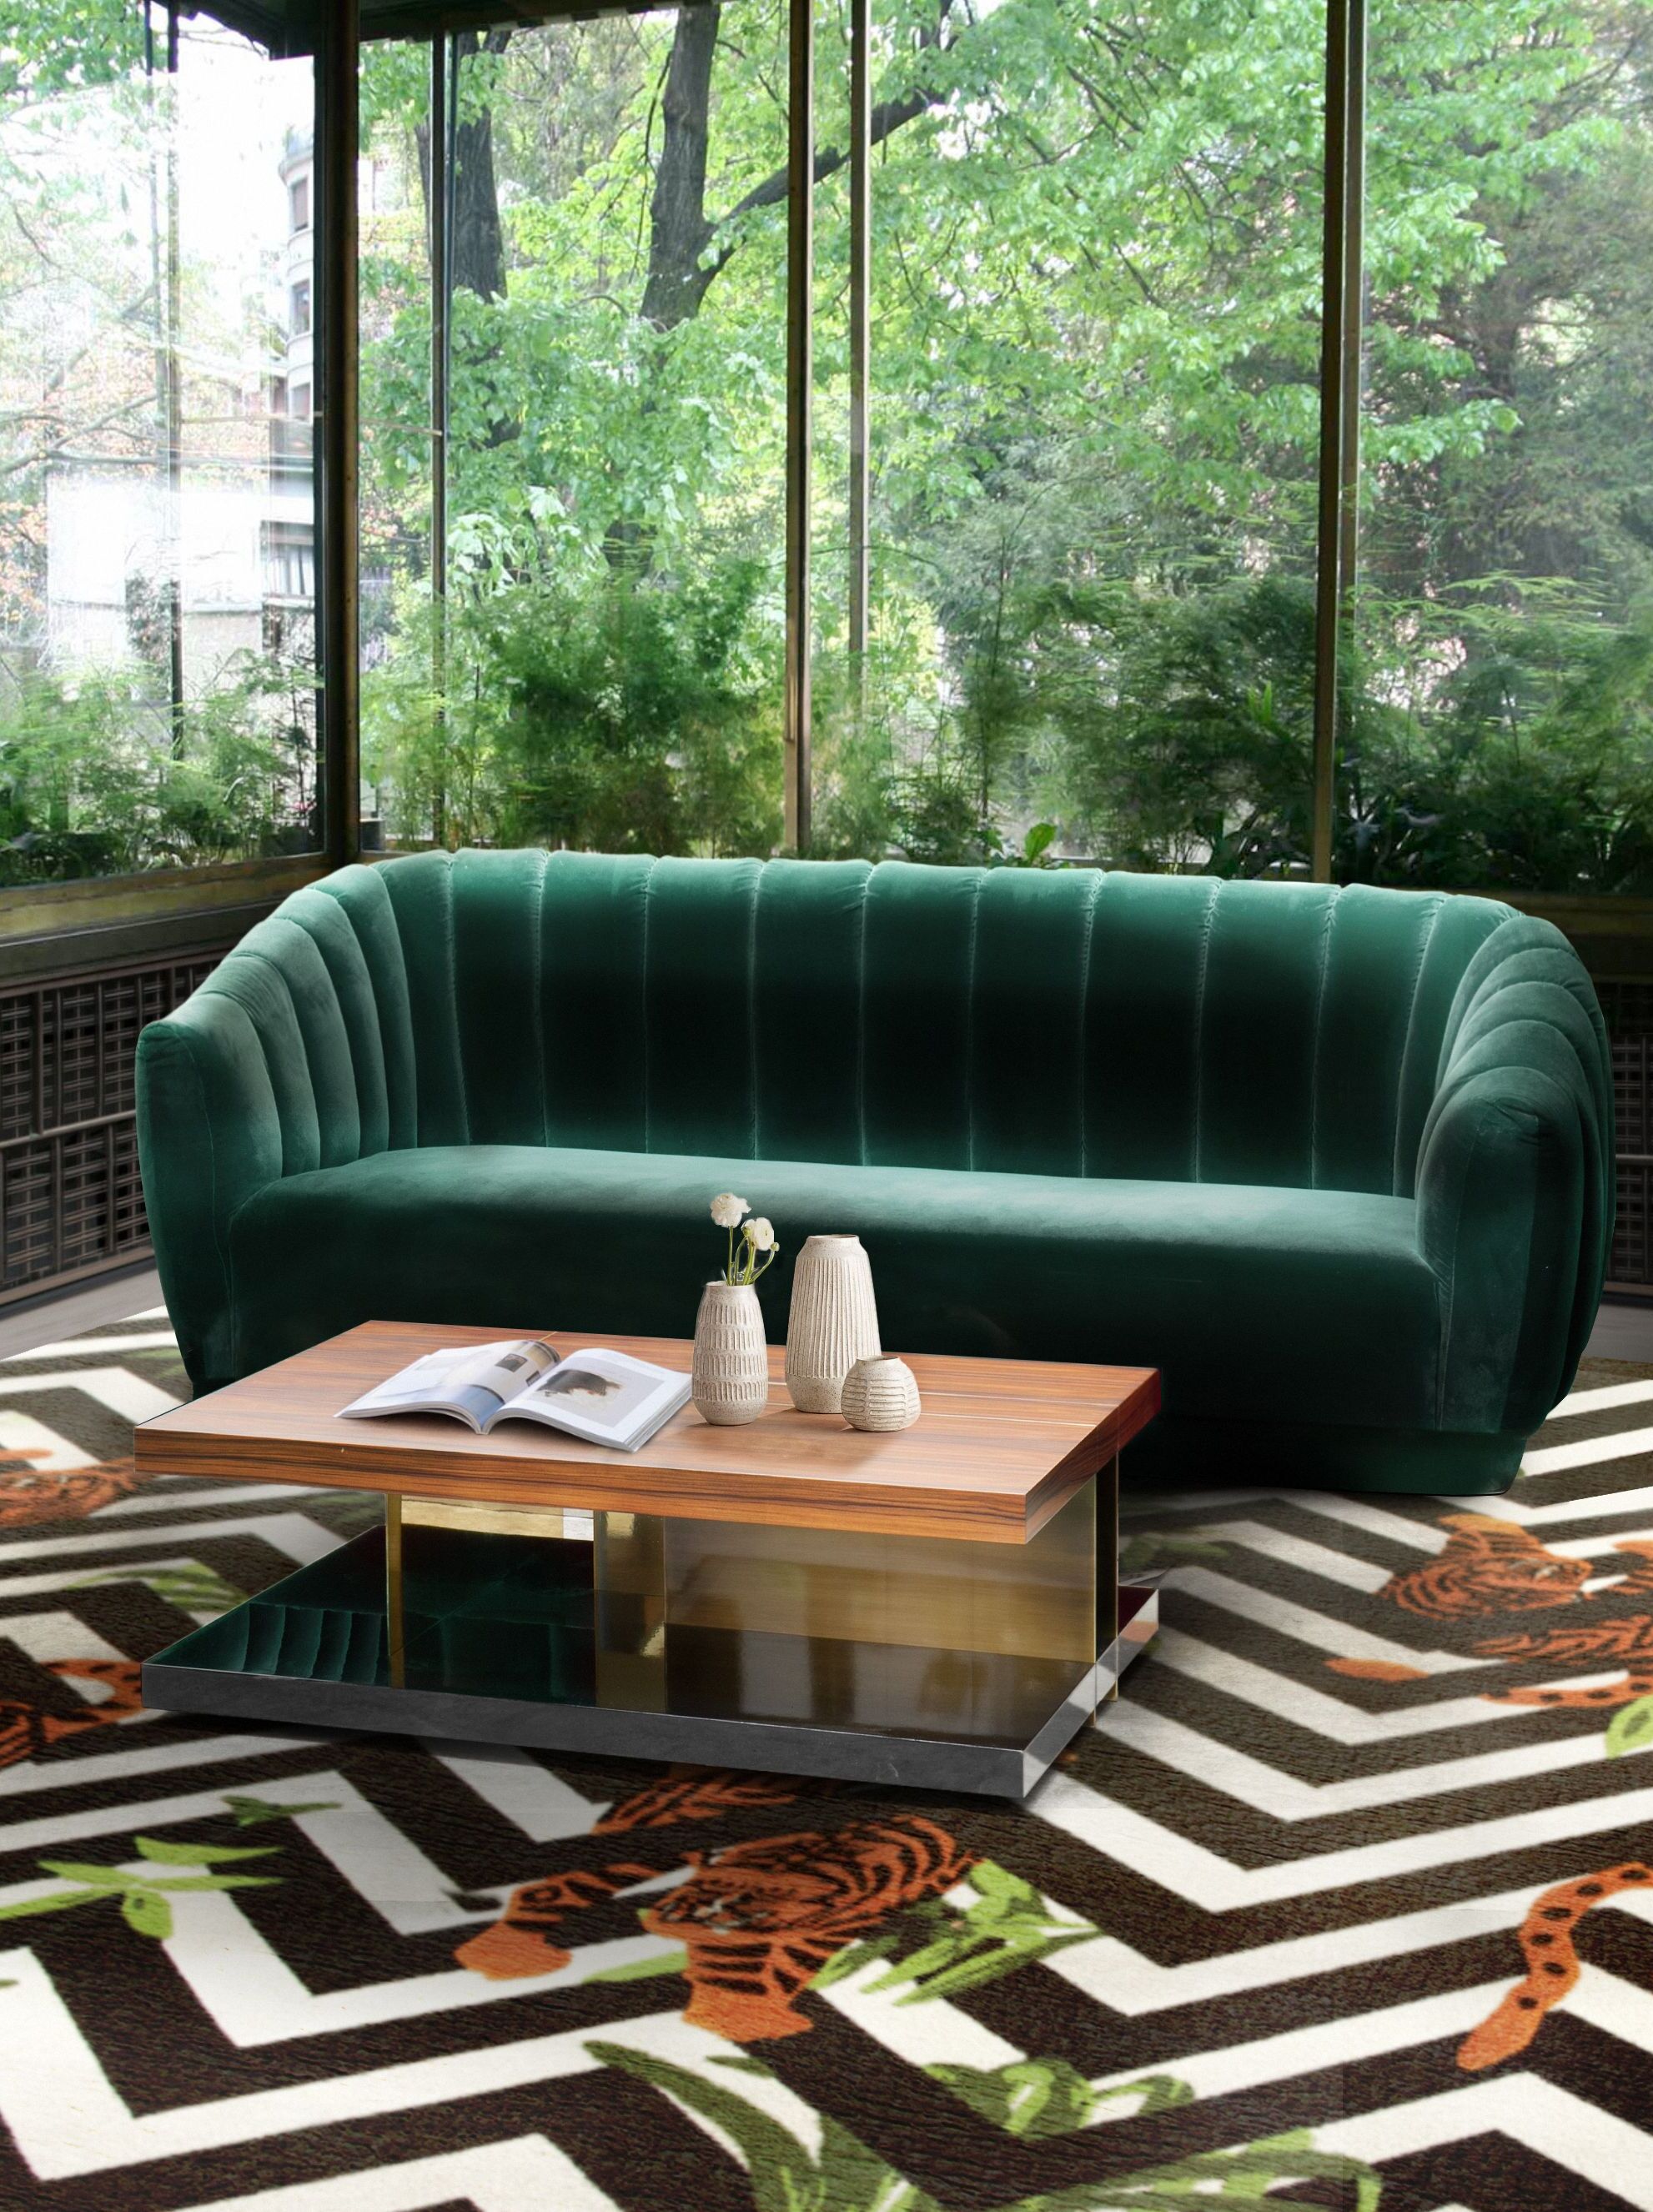 Modern Living Room With Biophilic Design by Rug'Society